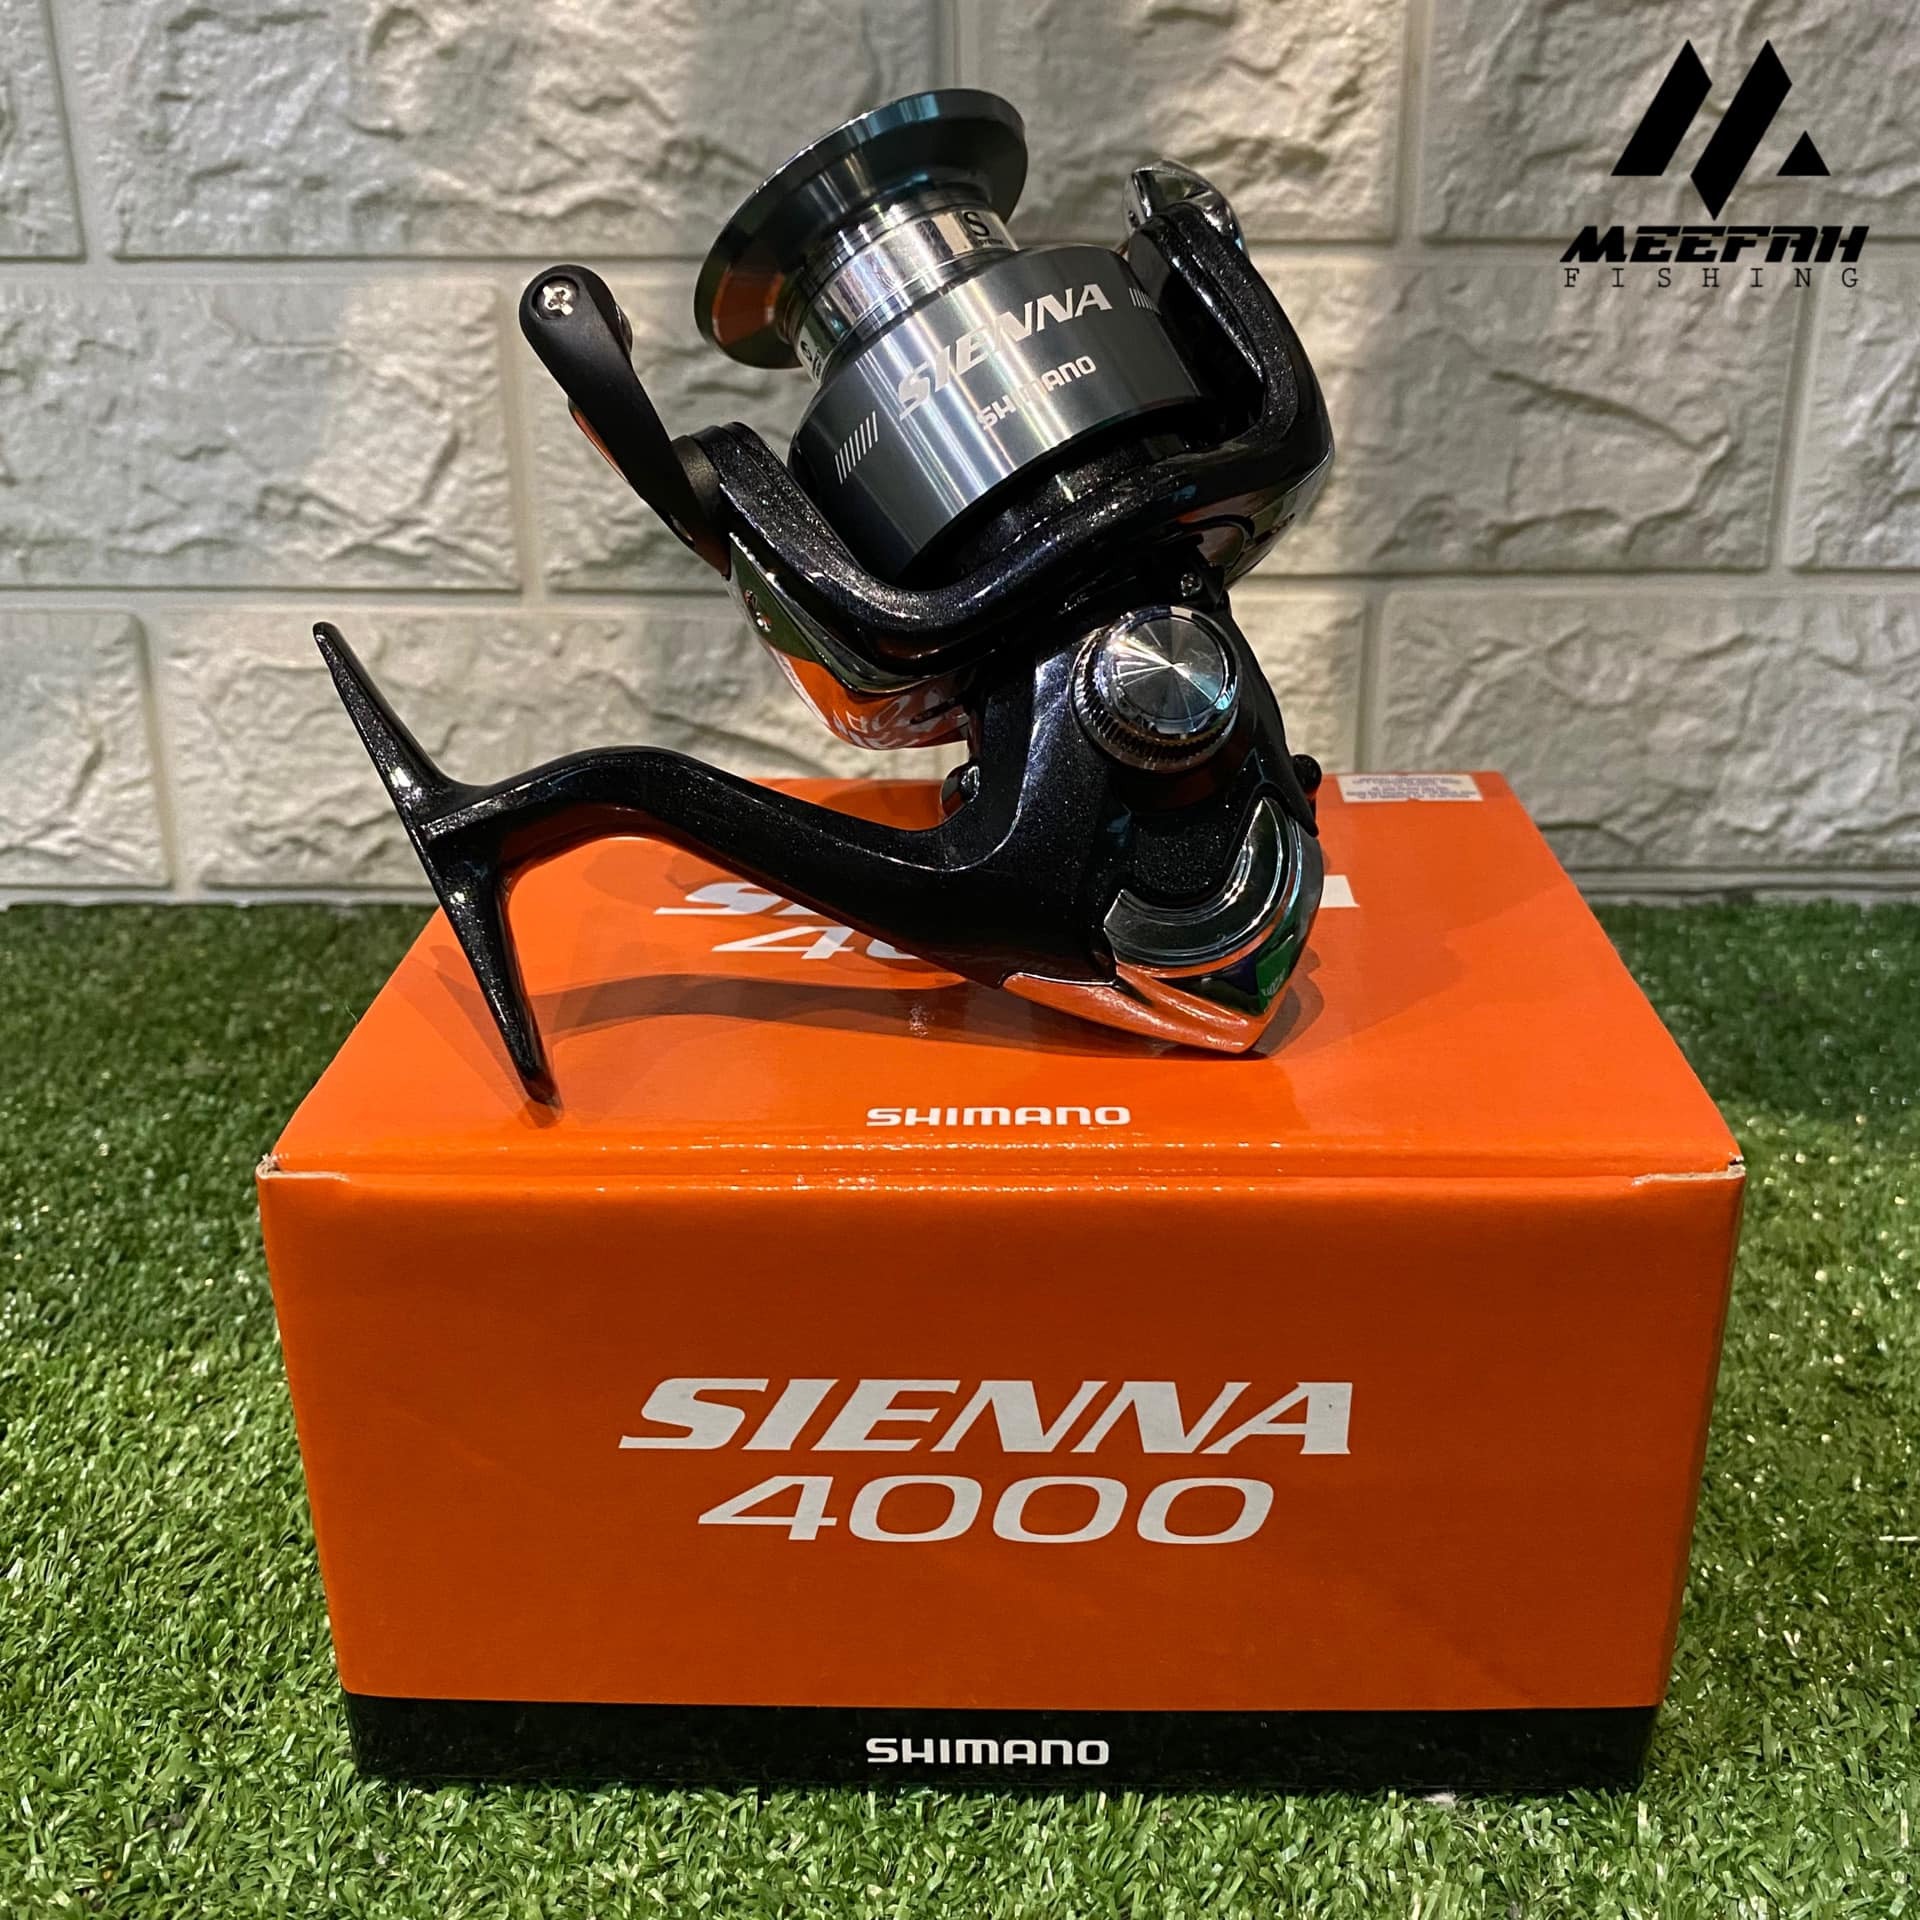 【Meefah Tackle】Shimano - SIENNA 4000 FE 🔥WITH 1 YEAR WARRANTY + FREE  GIFT🔥 - Spinning Reel Mesin Pancing